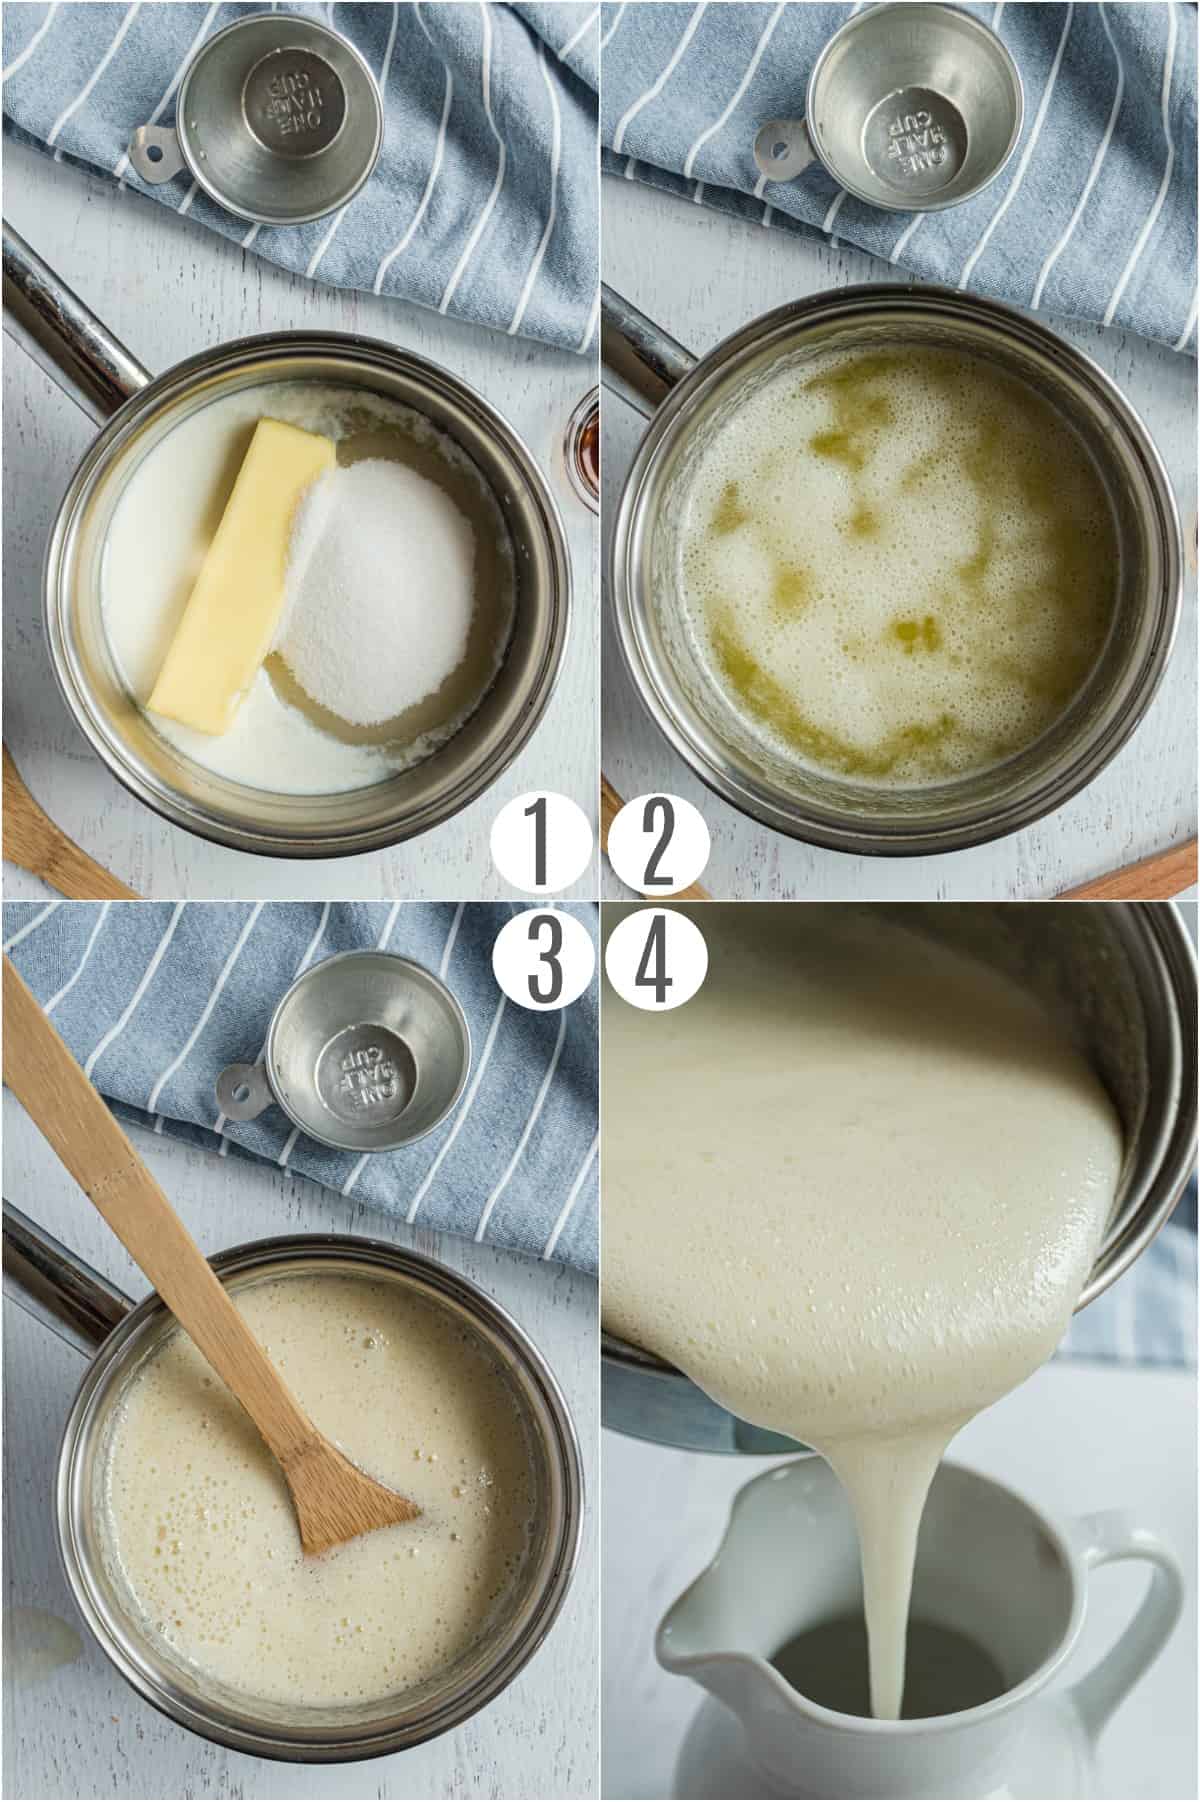 Step by step photos showing how to make homemade buttermilk syrup.